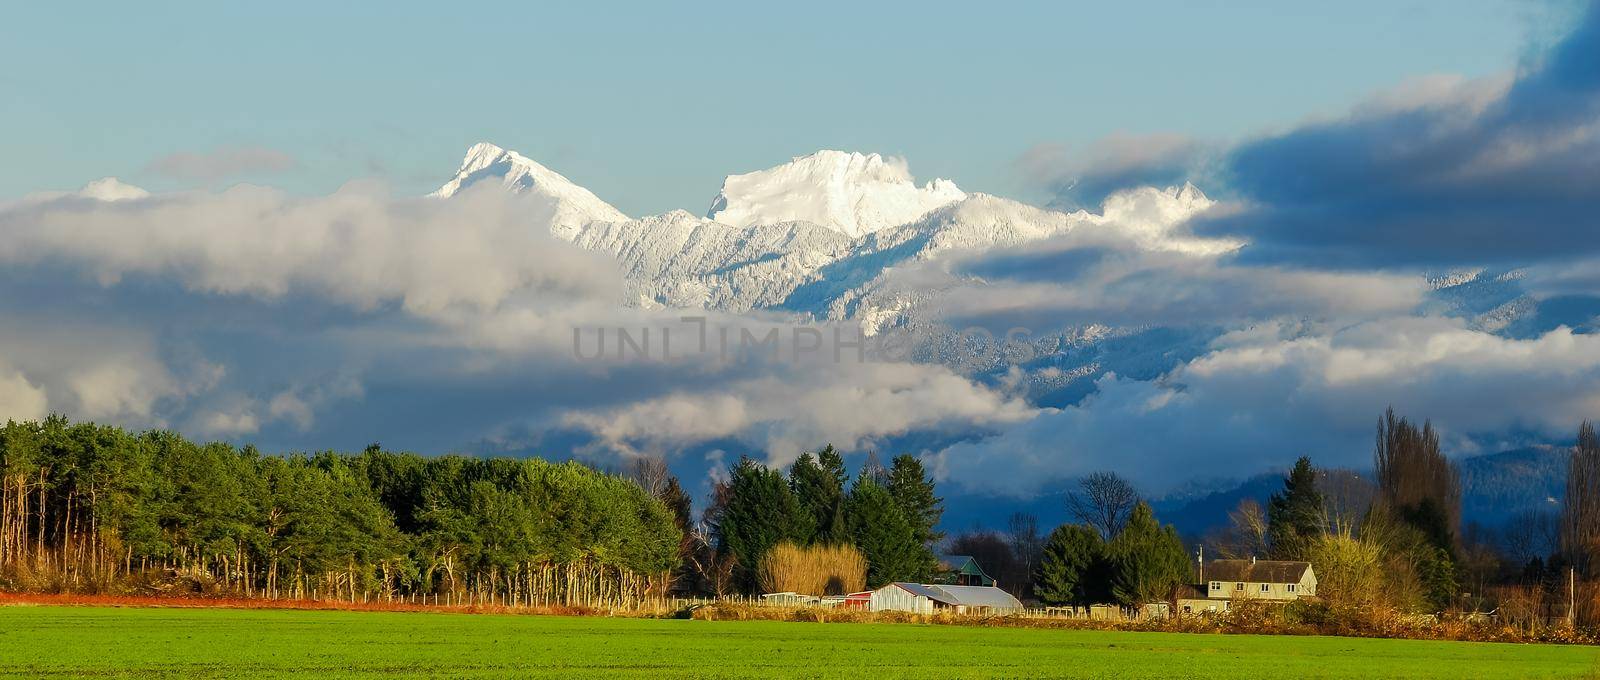 Pastoral overview over Fraser valley farm lands on snowy mountains background by Imagenet